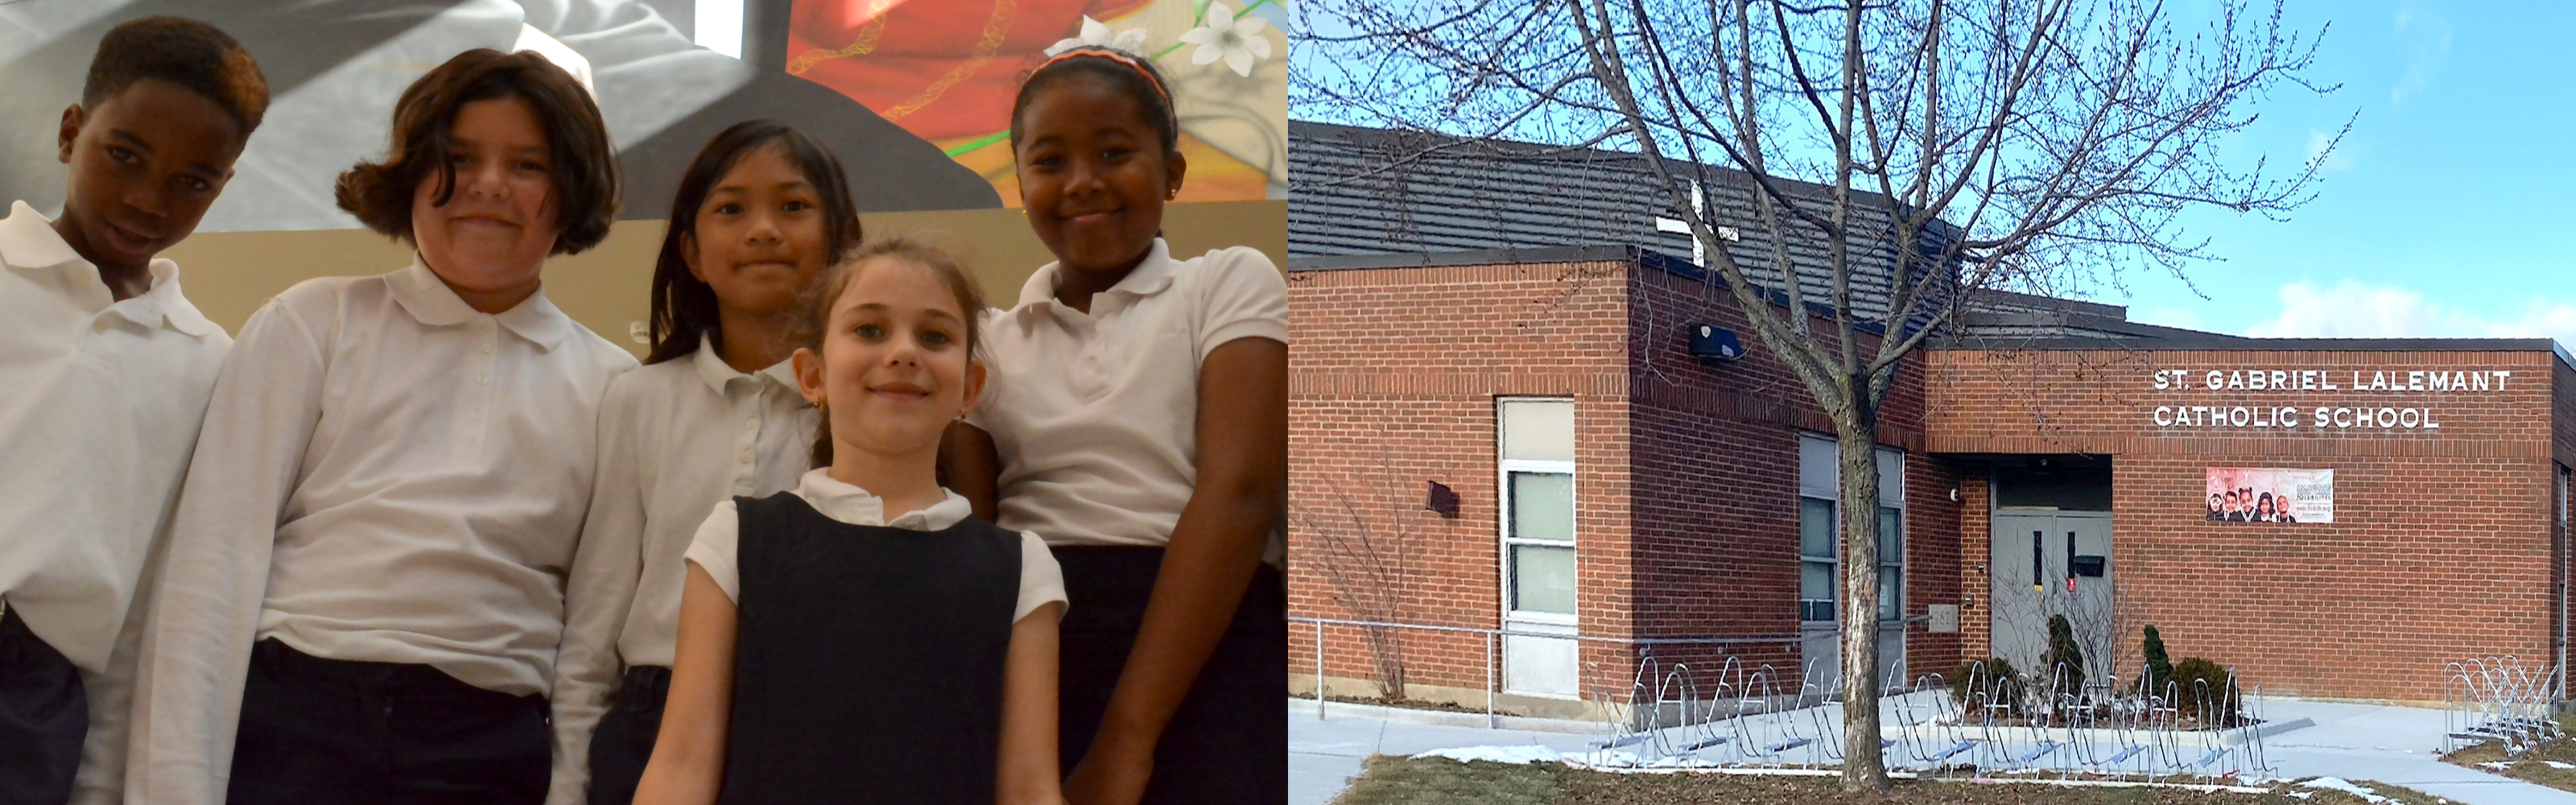 Left, a group of elementary students in white and navy school uniform. Right, the front of the St. Gabriel Lalemant Catholic School building.